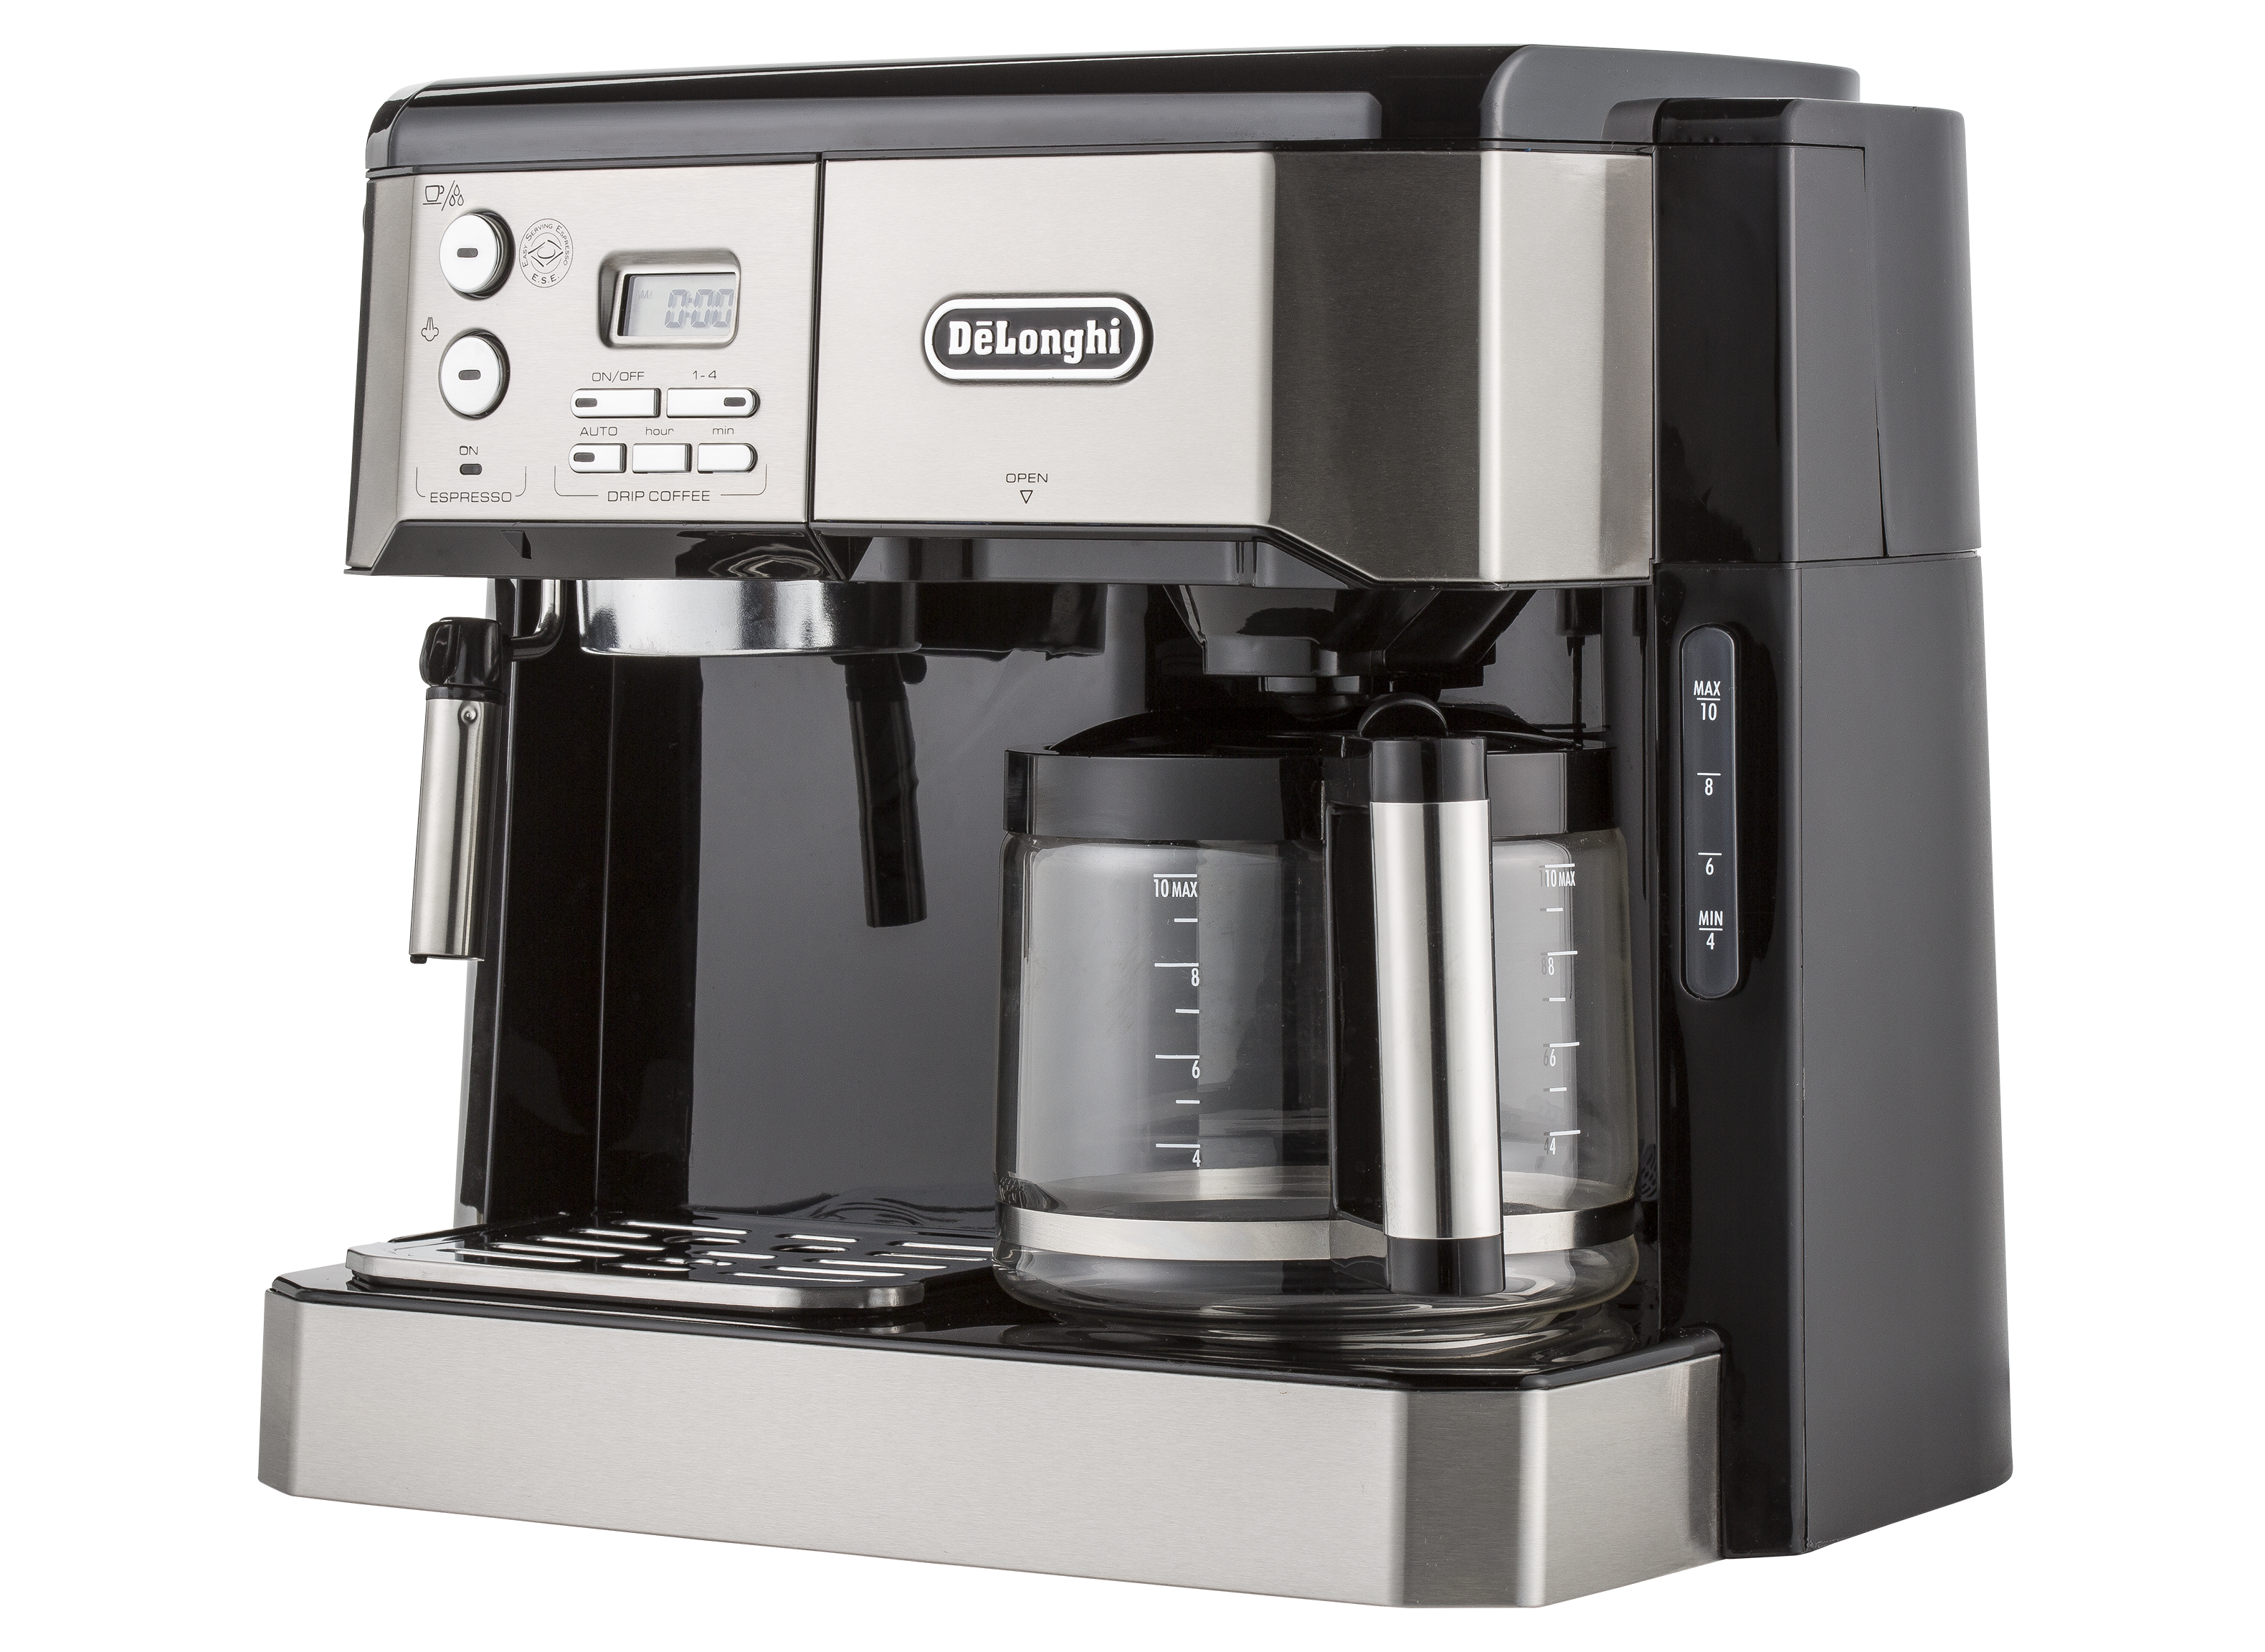 https://crdms.images.consumerreports.org/prod/products/cr/models/388626-coffeemakers-delonghi-combibco430.png